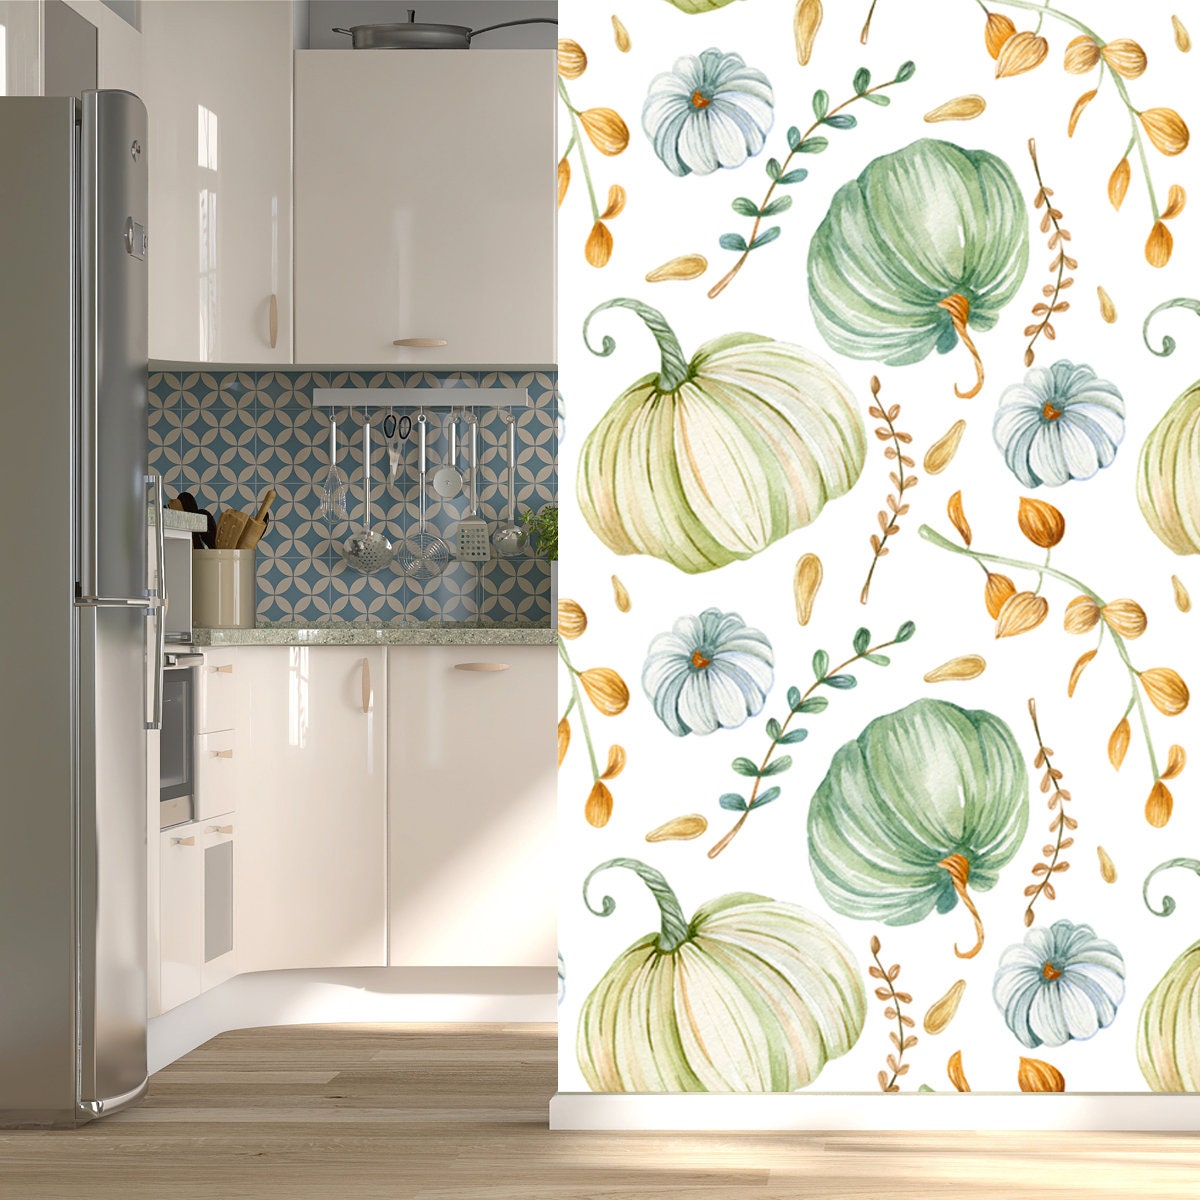 Seamless Watercolor Pattern with Green, White Pumpkins and Autumn Leaves Wallpaper Kitchen Mural